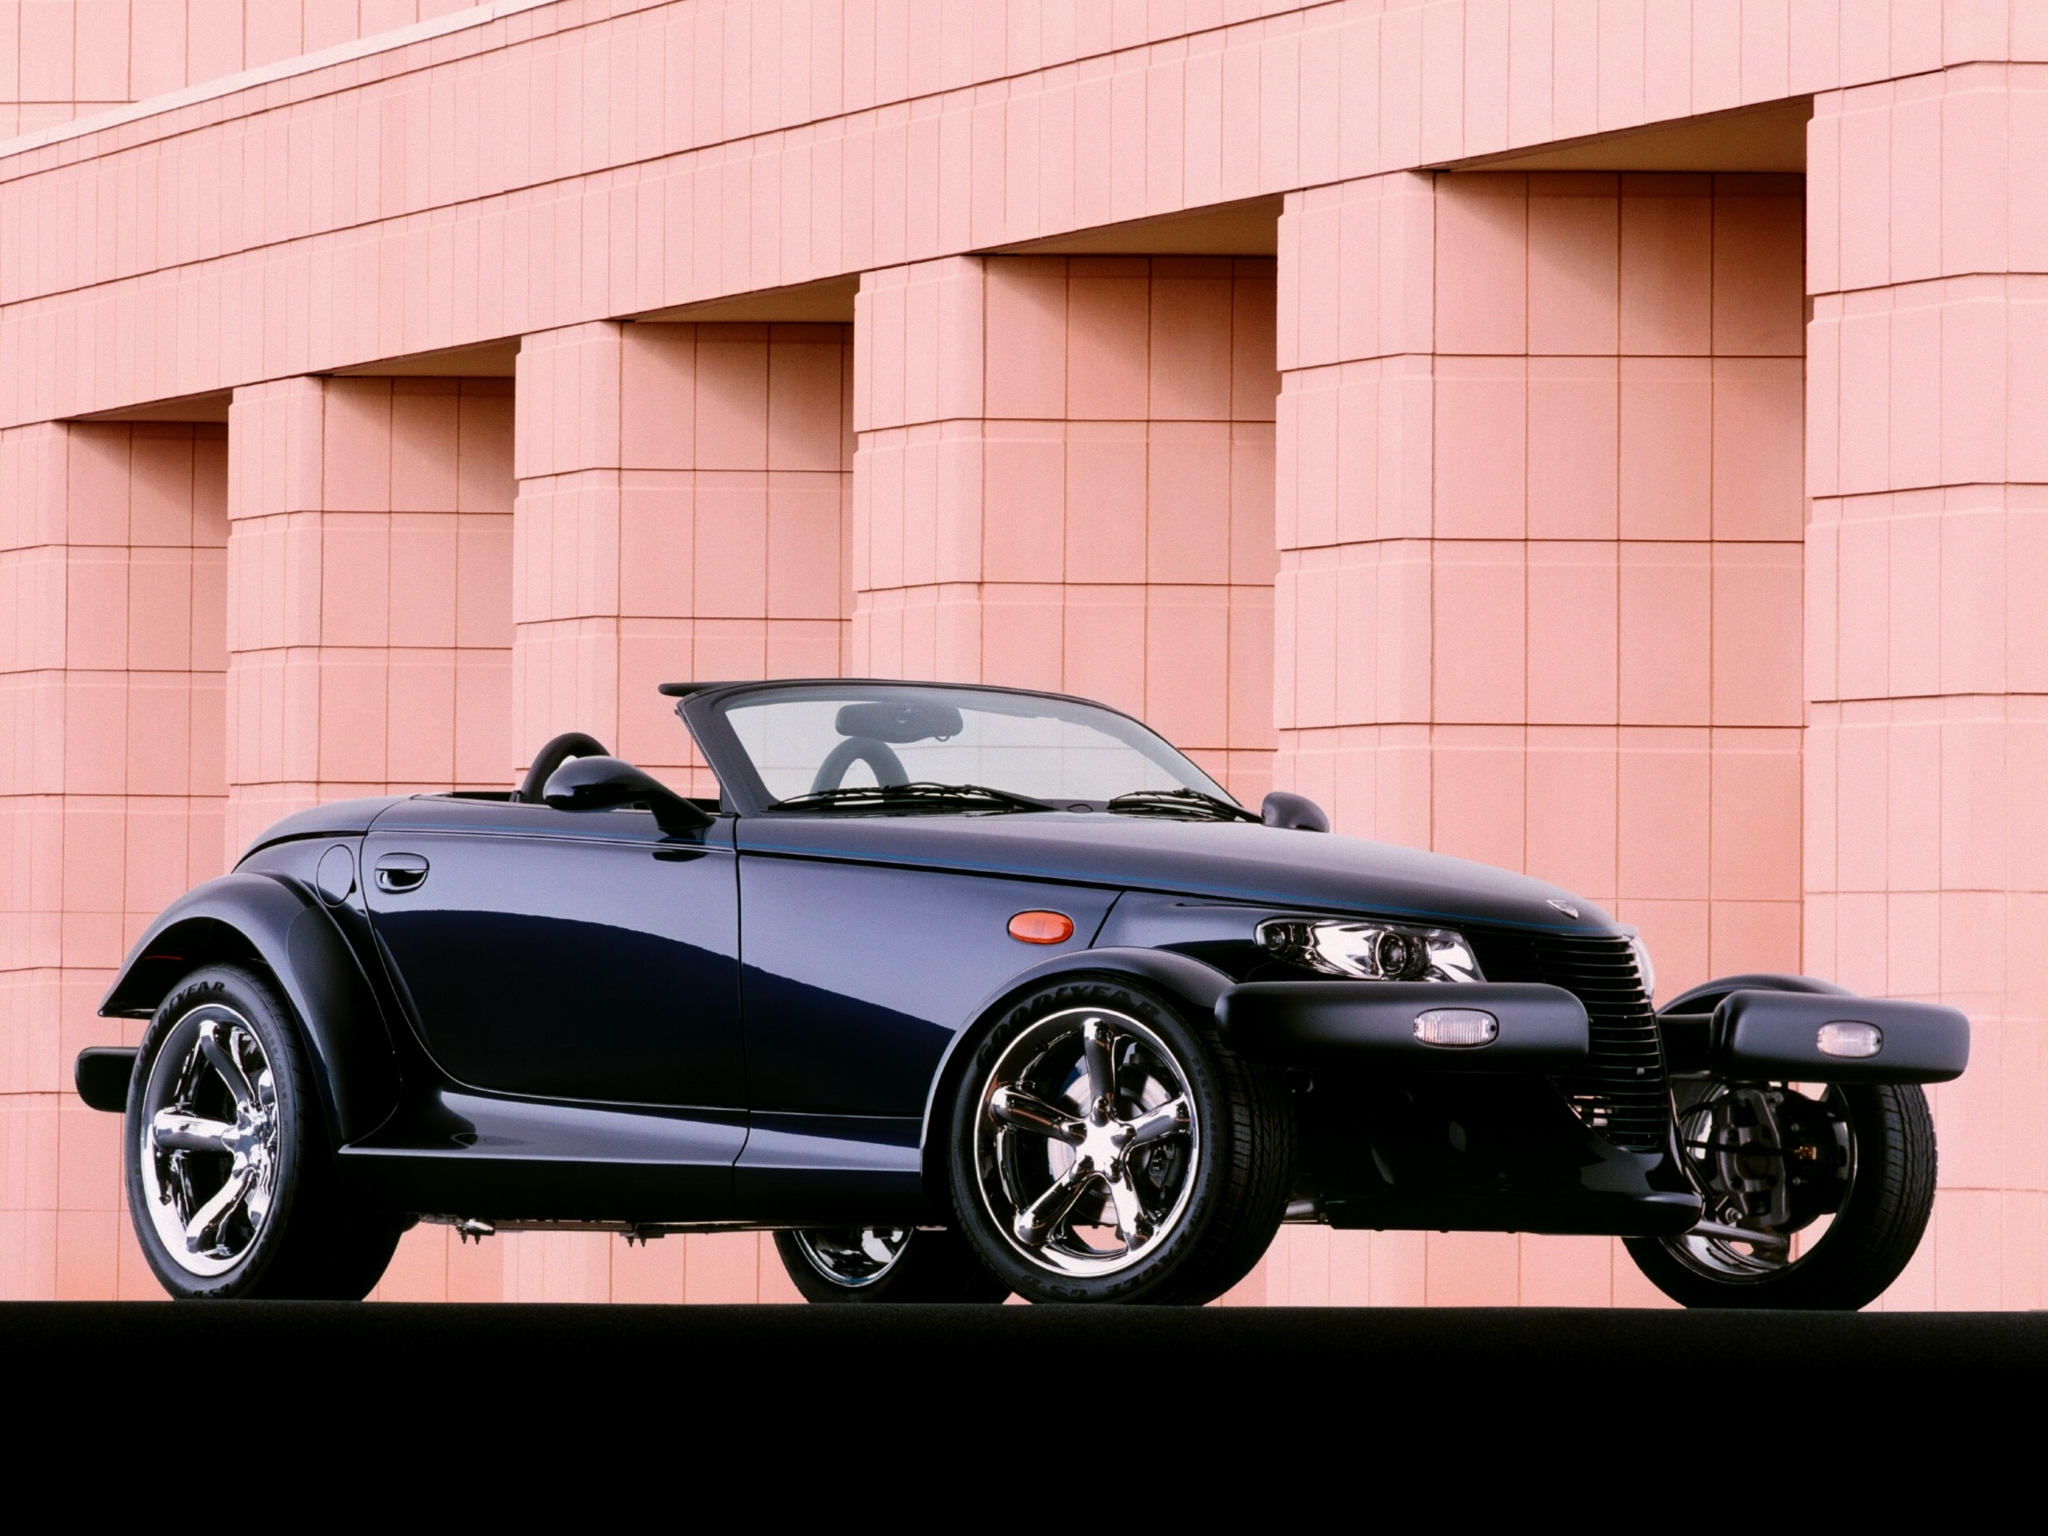 2001, Plymouth, Prowler, Mulholland, Supercar Wallpaper